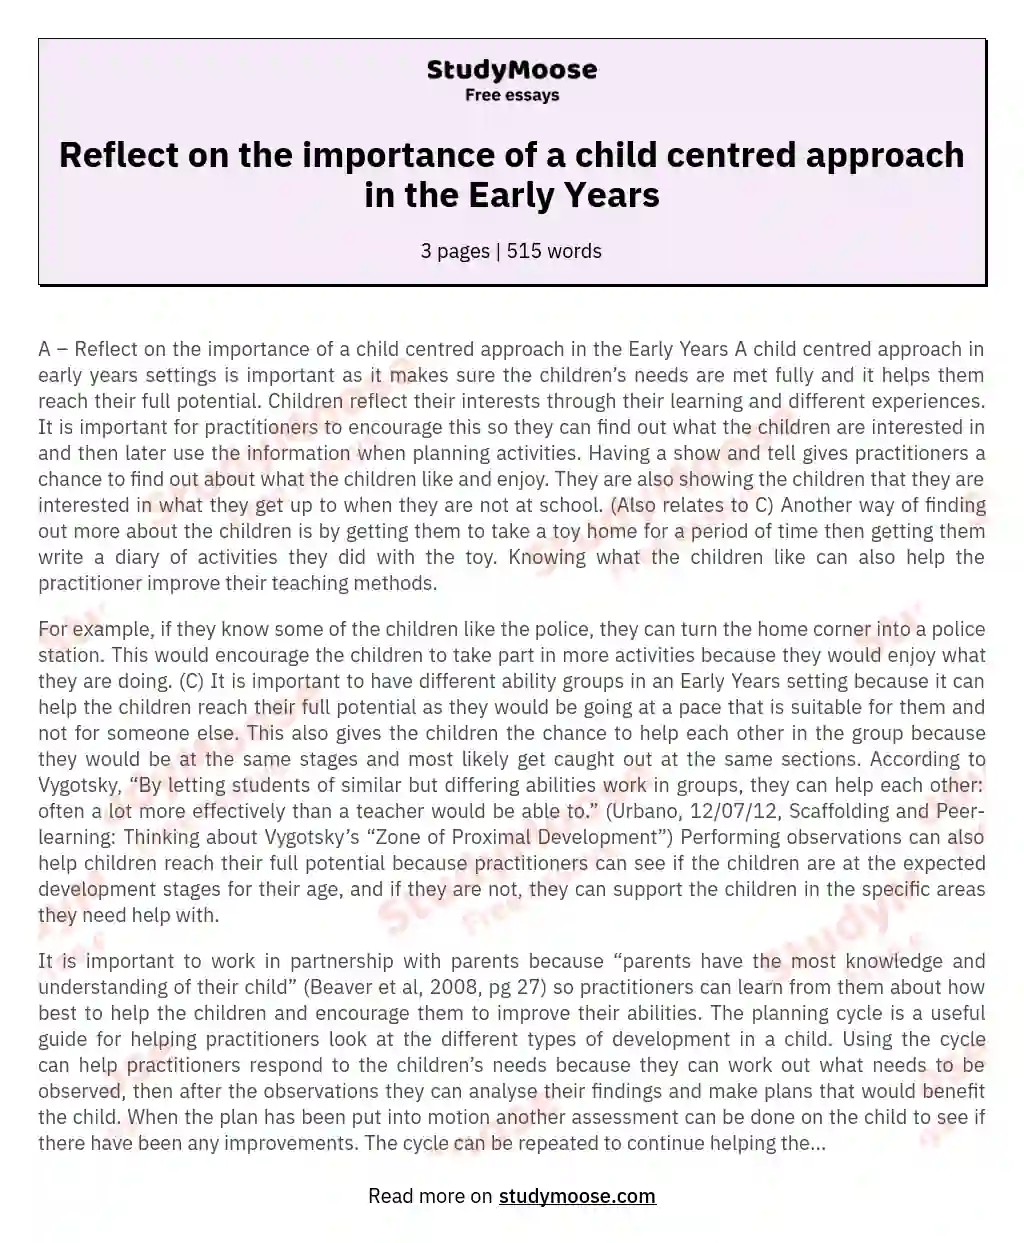 Reflect on the importance of a child centred approach in the Early Years essay